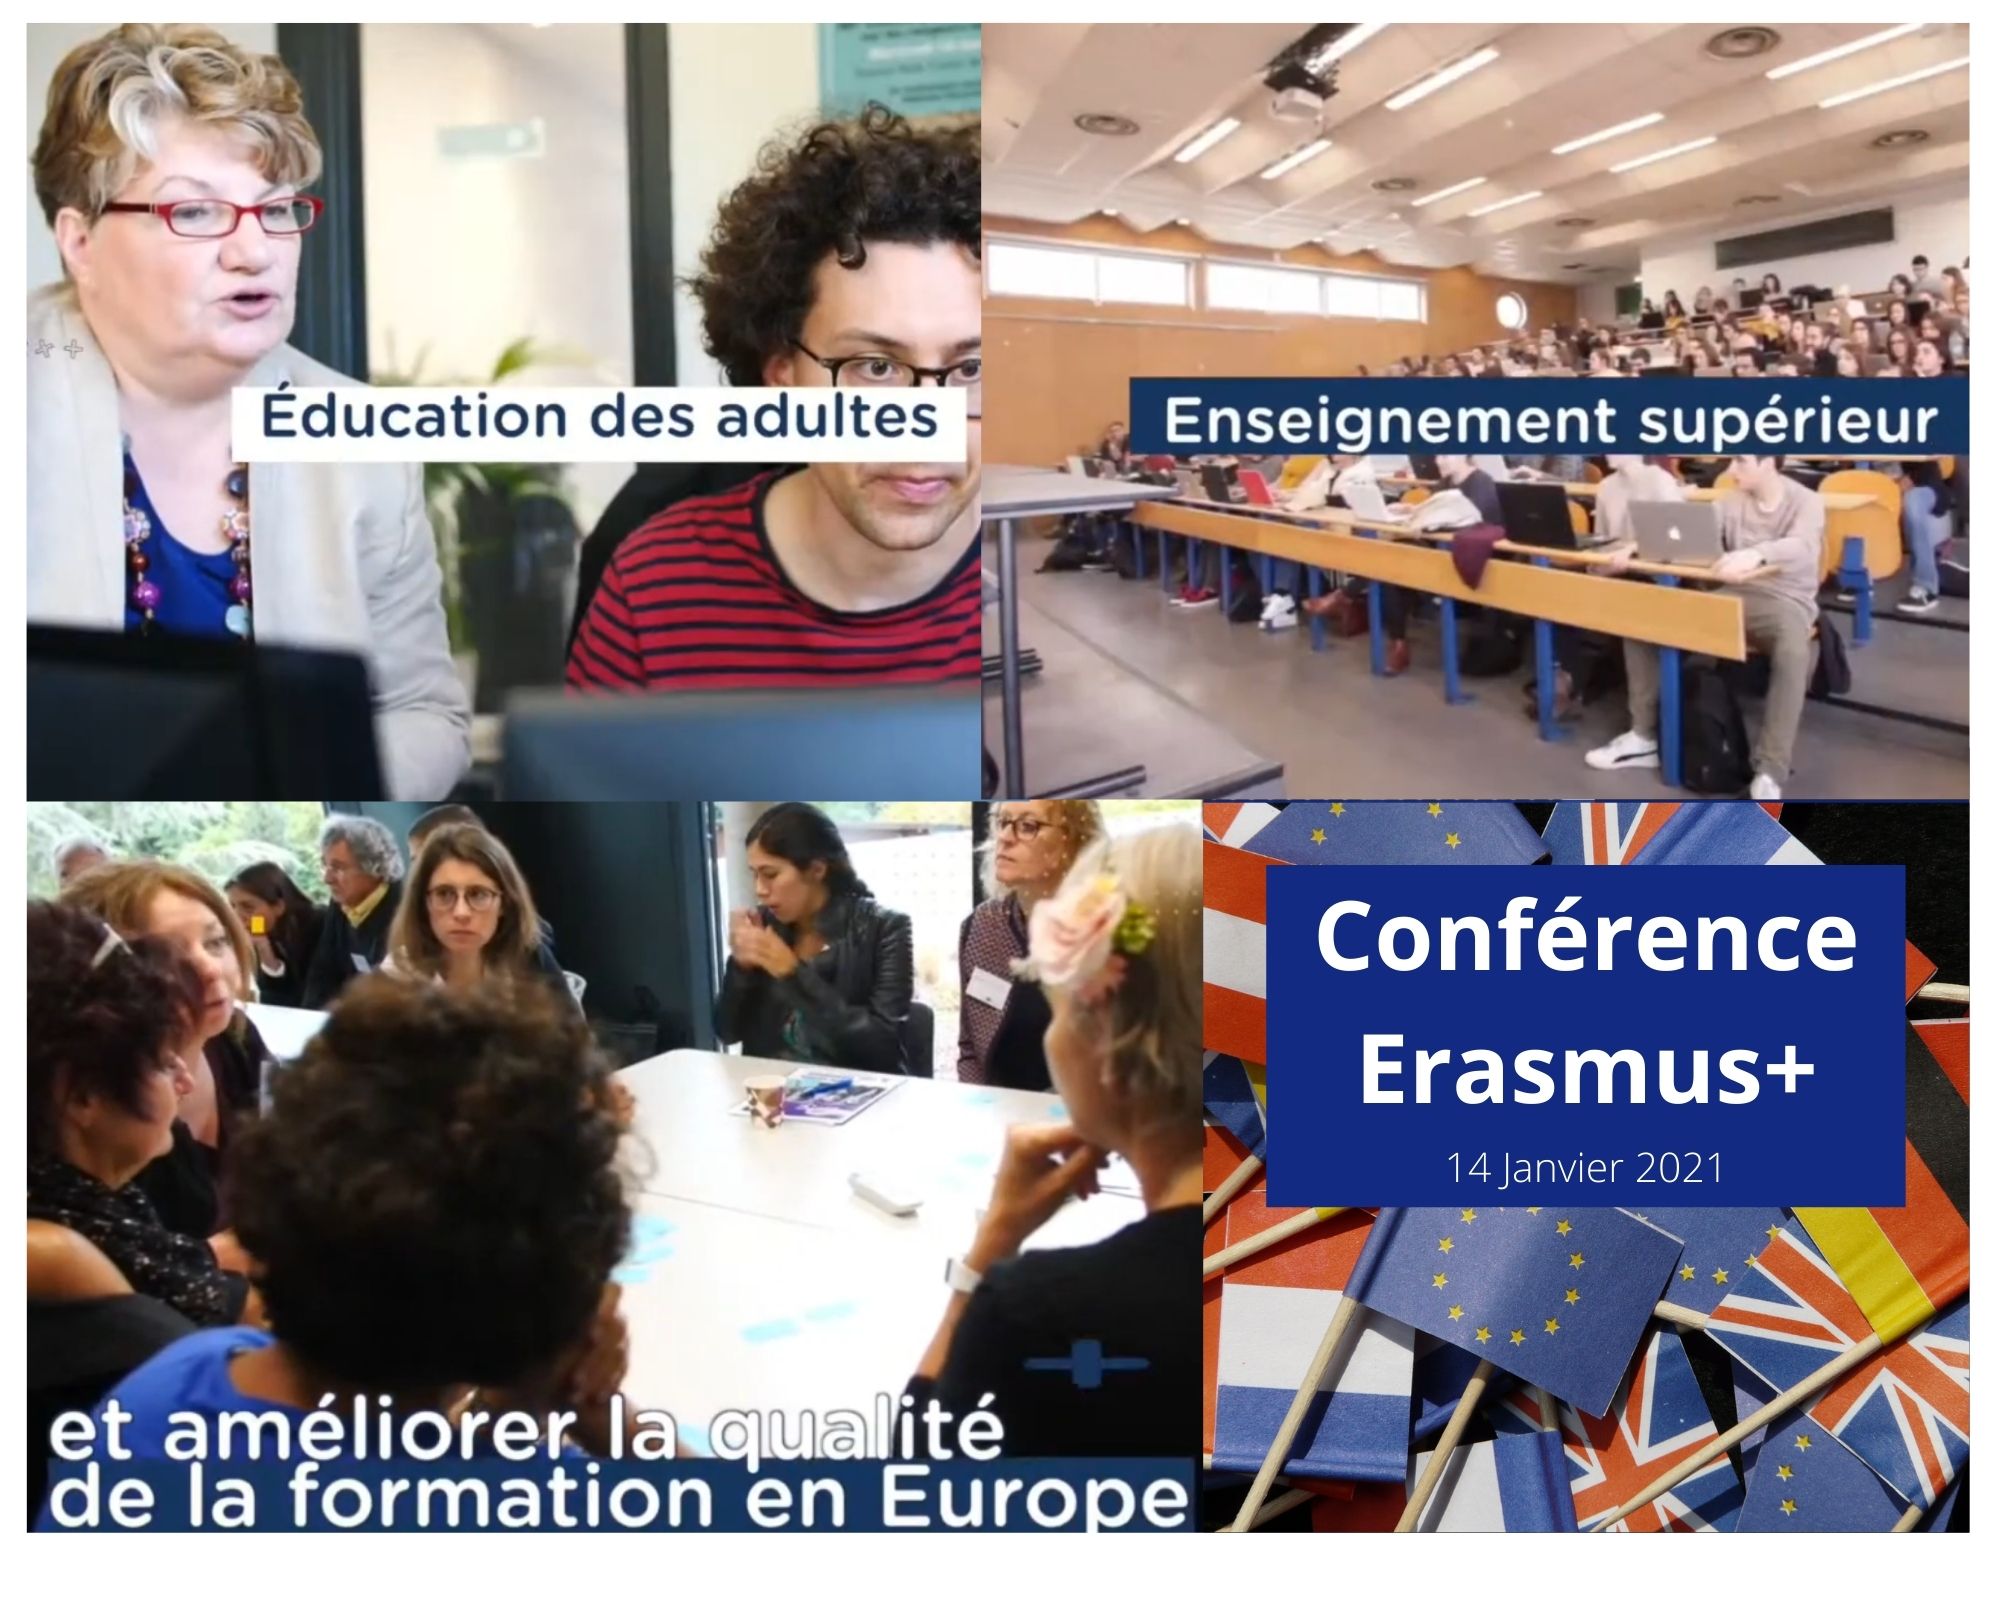 Erasmus+ 2021-2027: new opportunities and challenges.